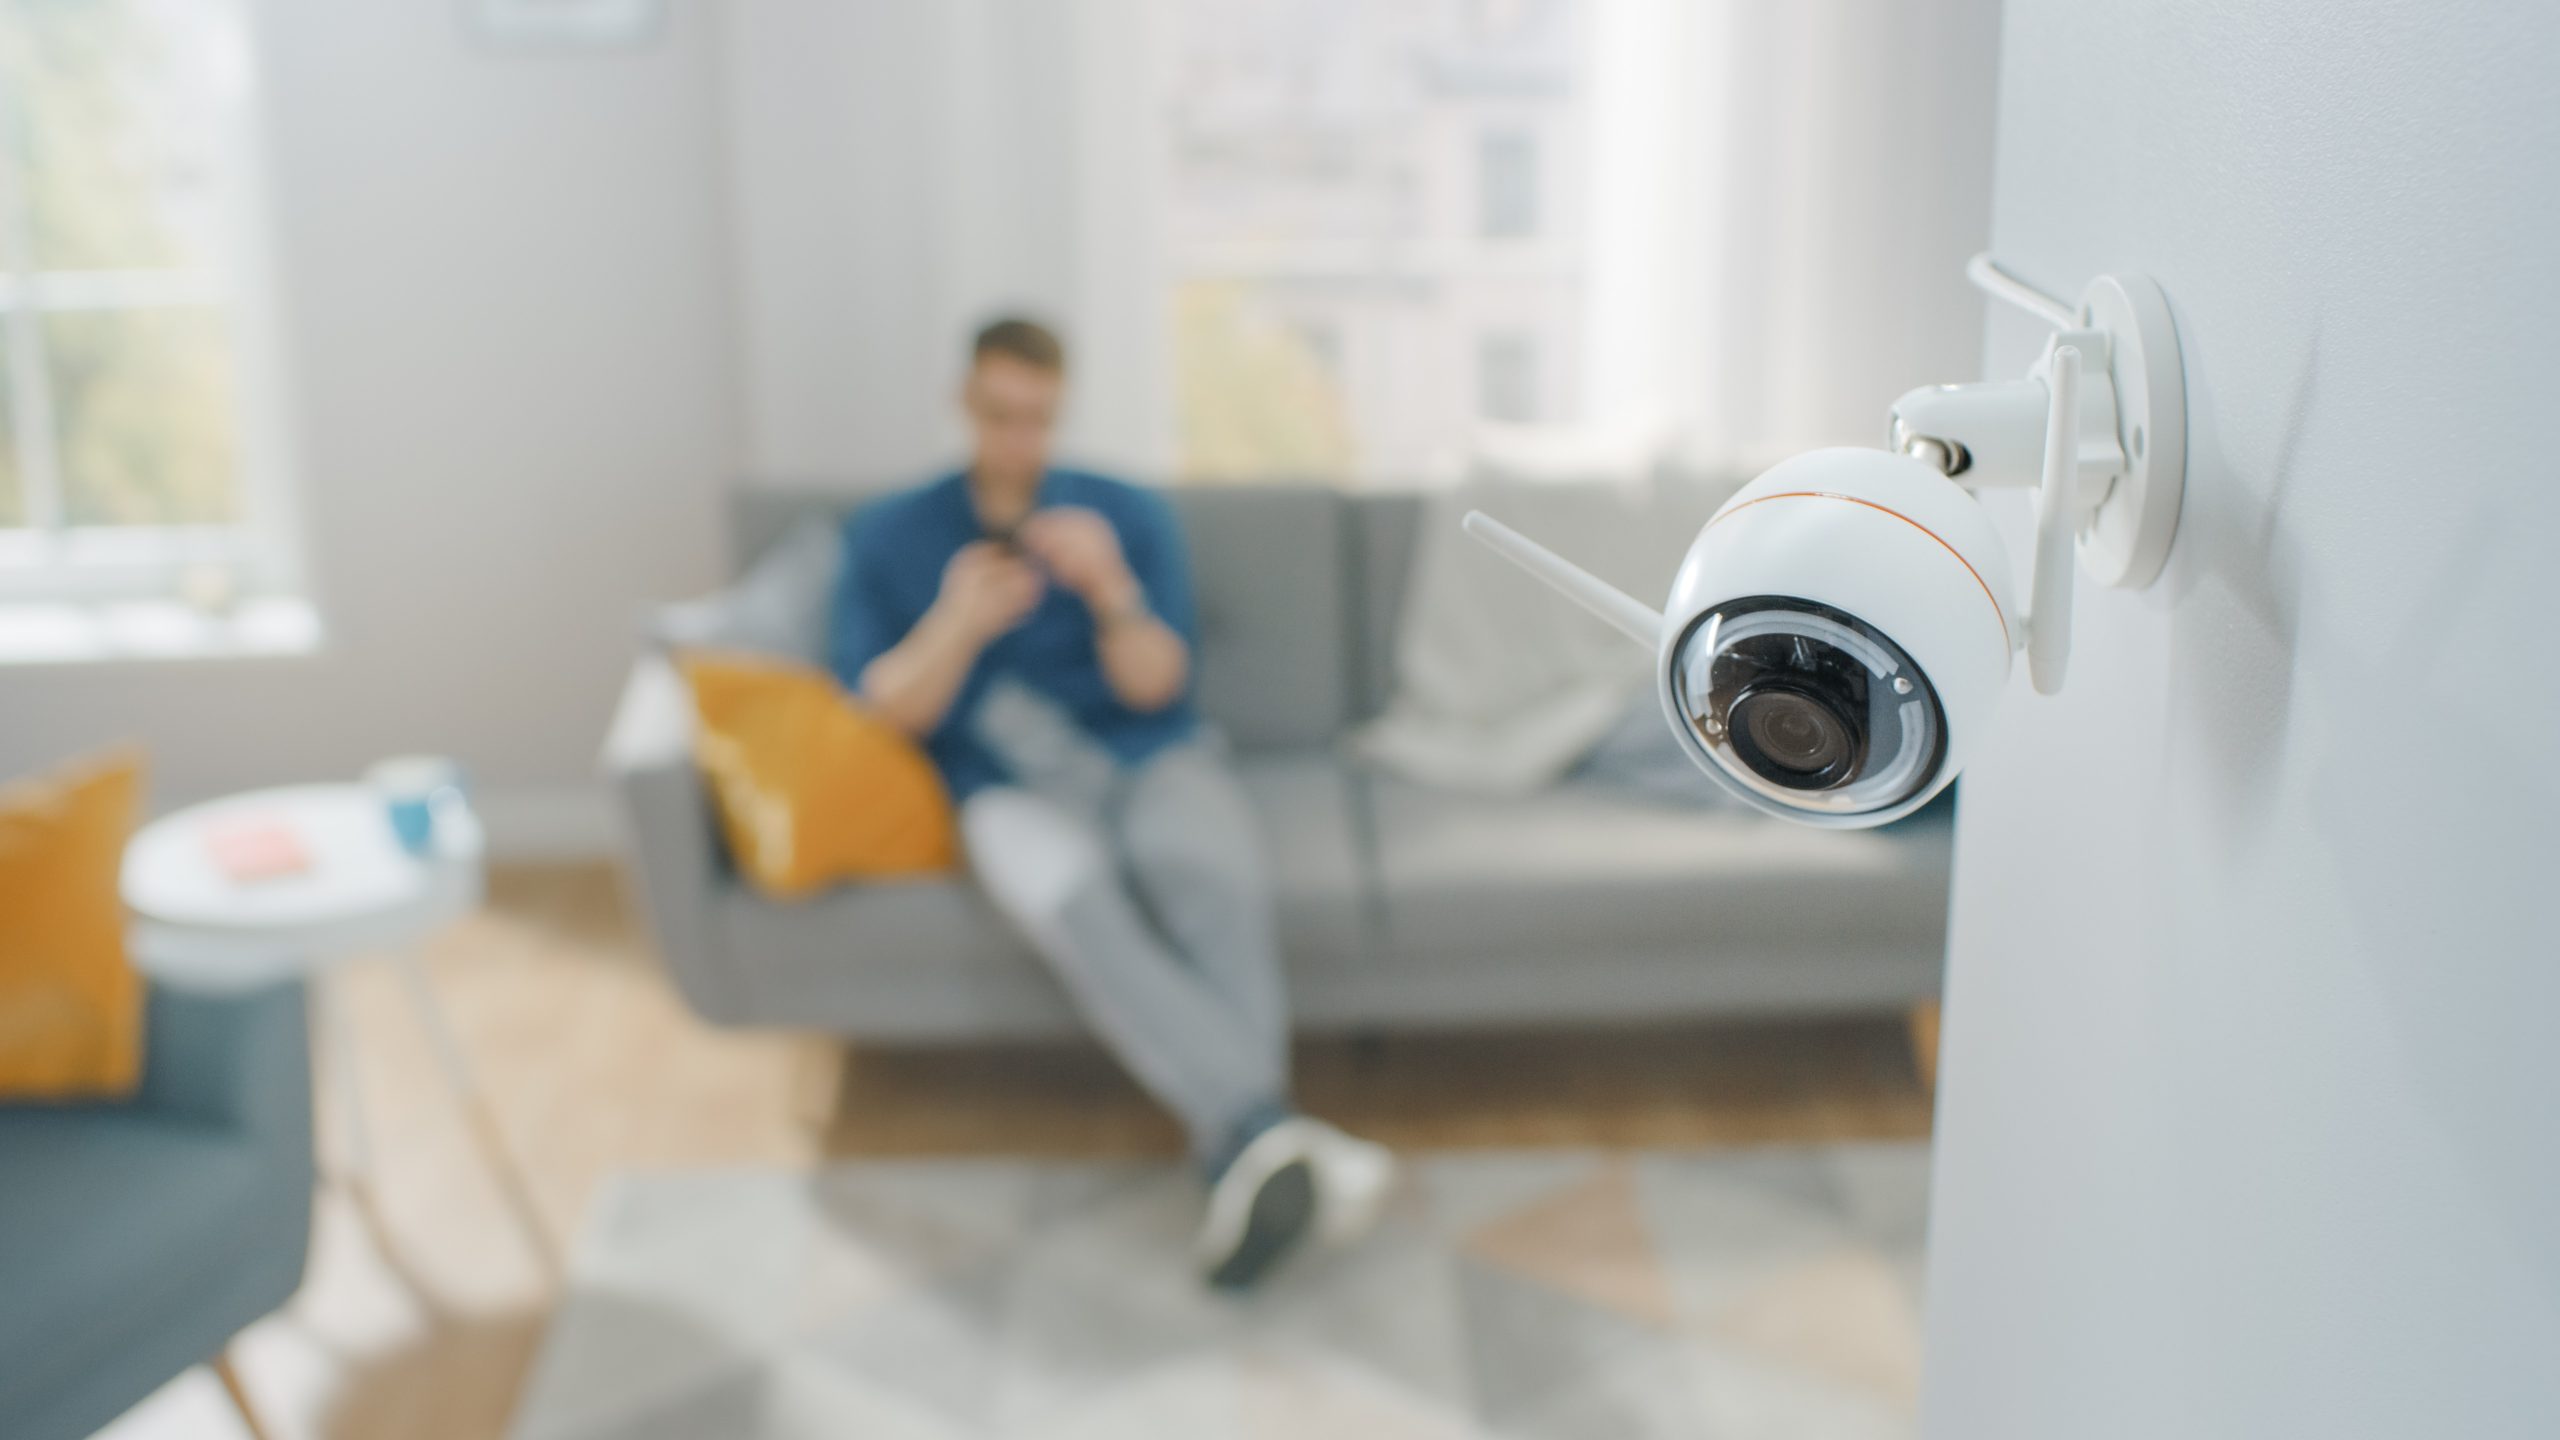 Surveillance technology and restrictive practices – what you need to know